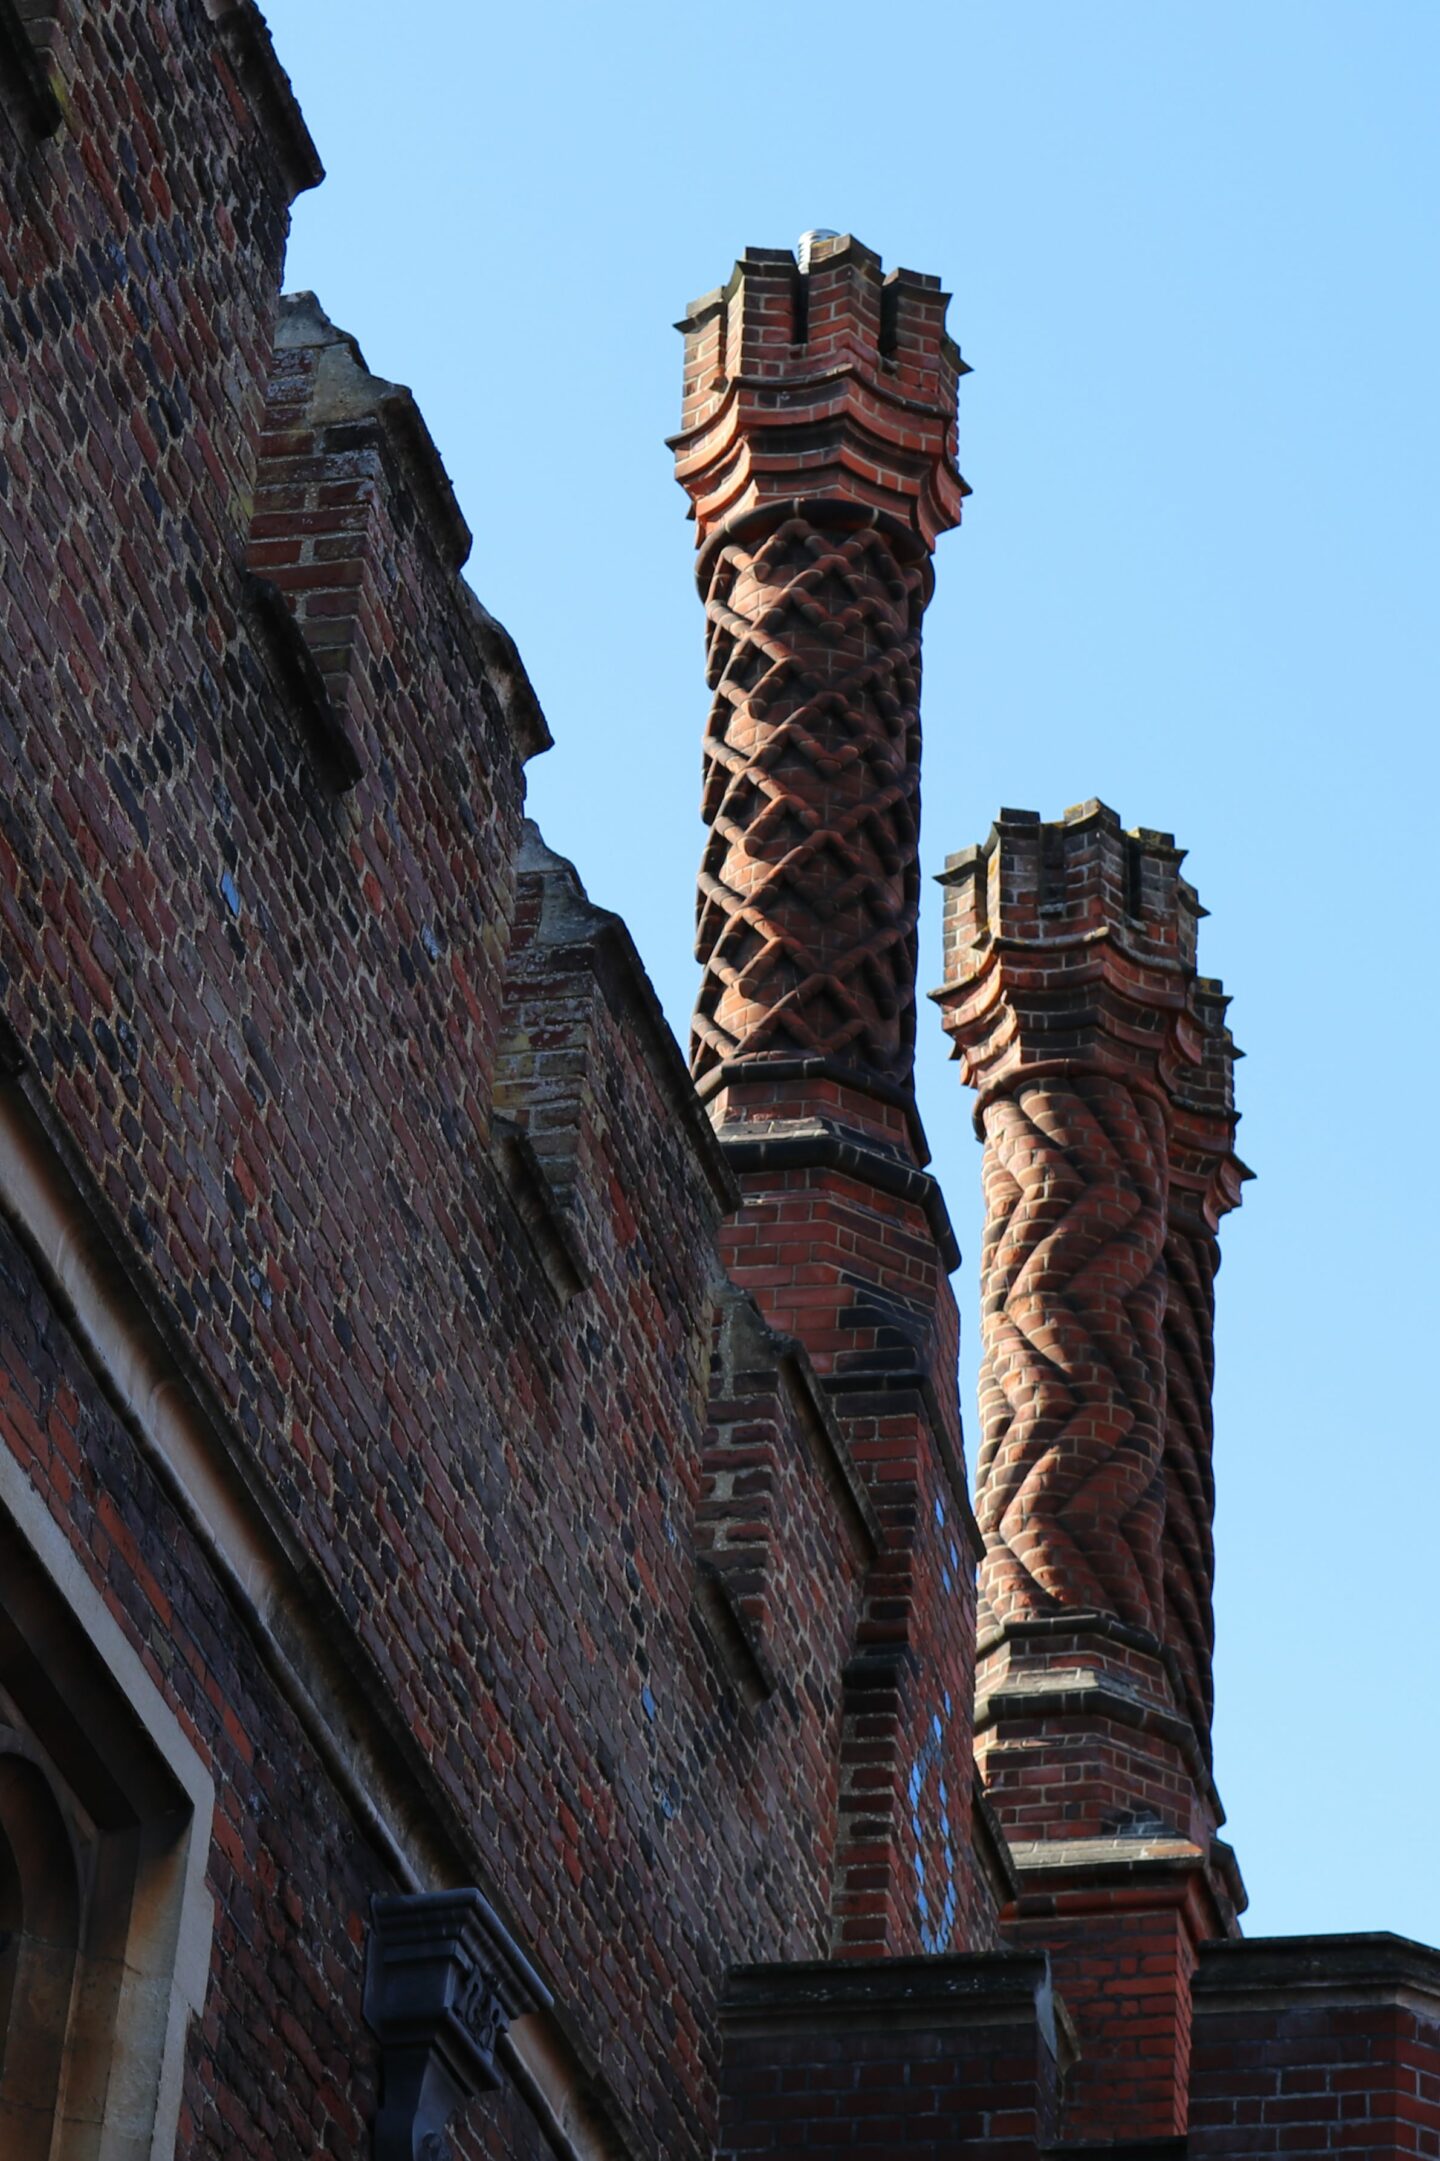 Hampton Court Palace's famous chimneys displayed wealth to Henry VIII's subjects.